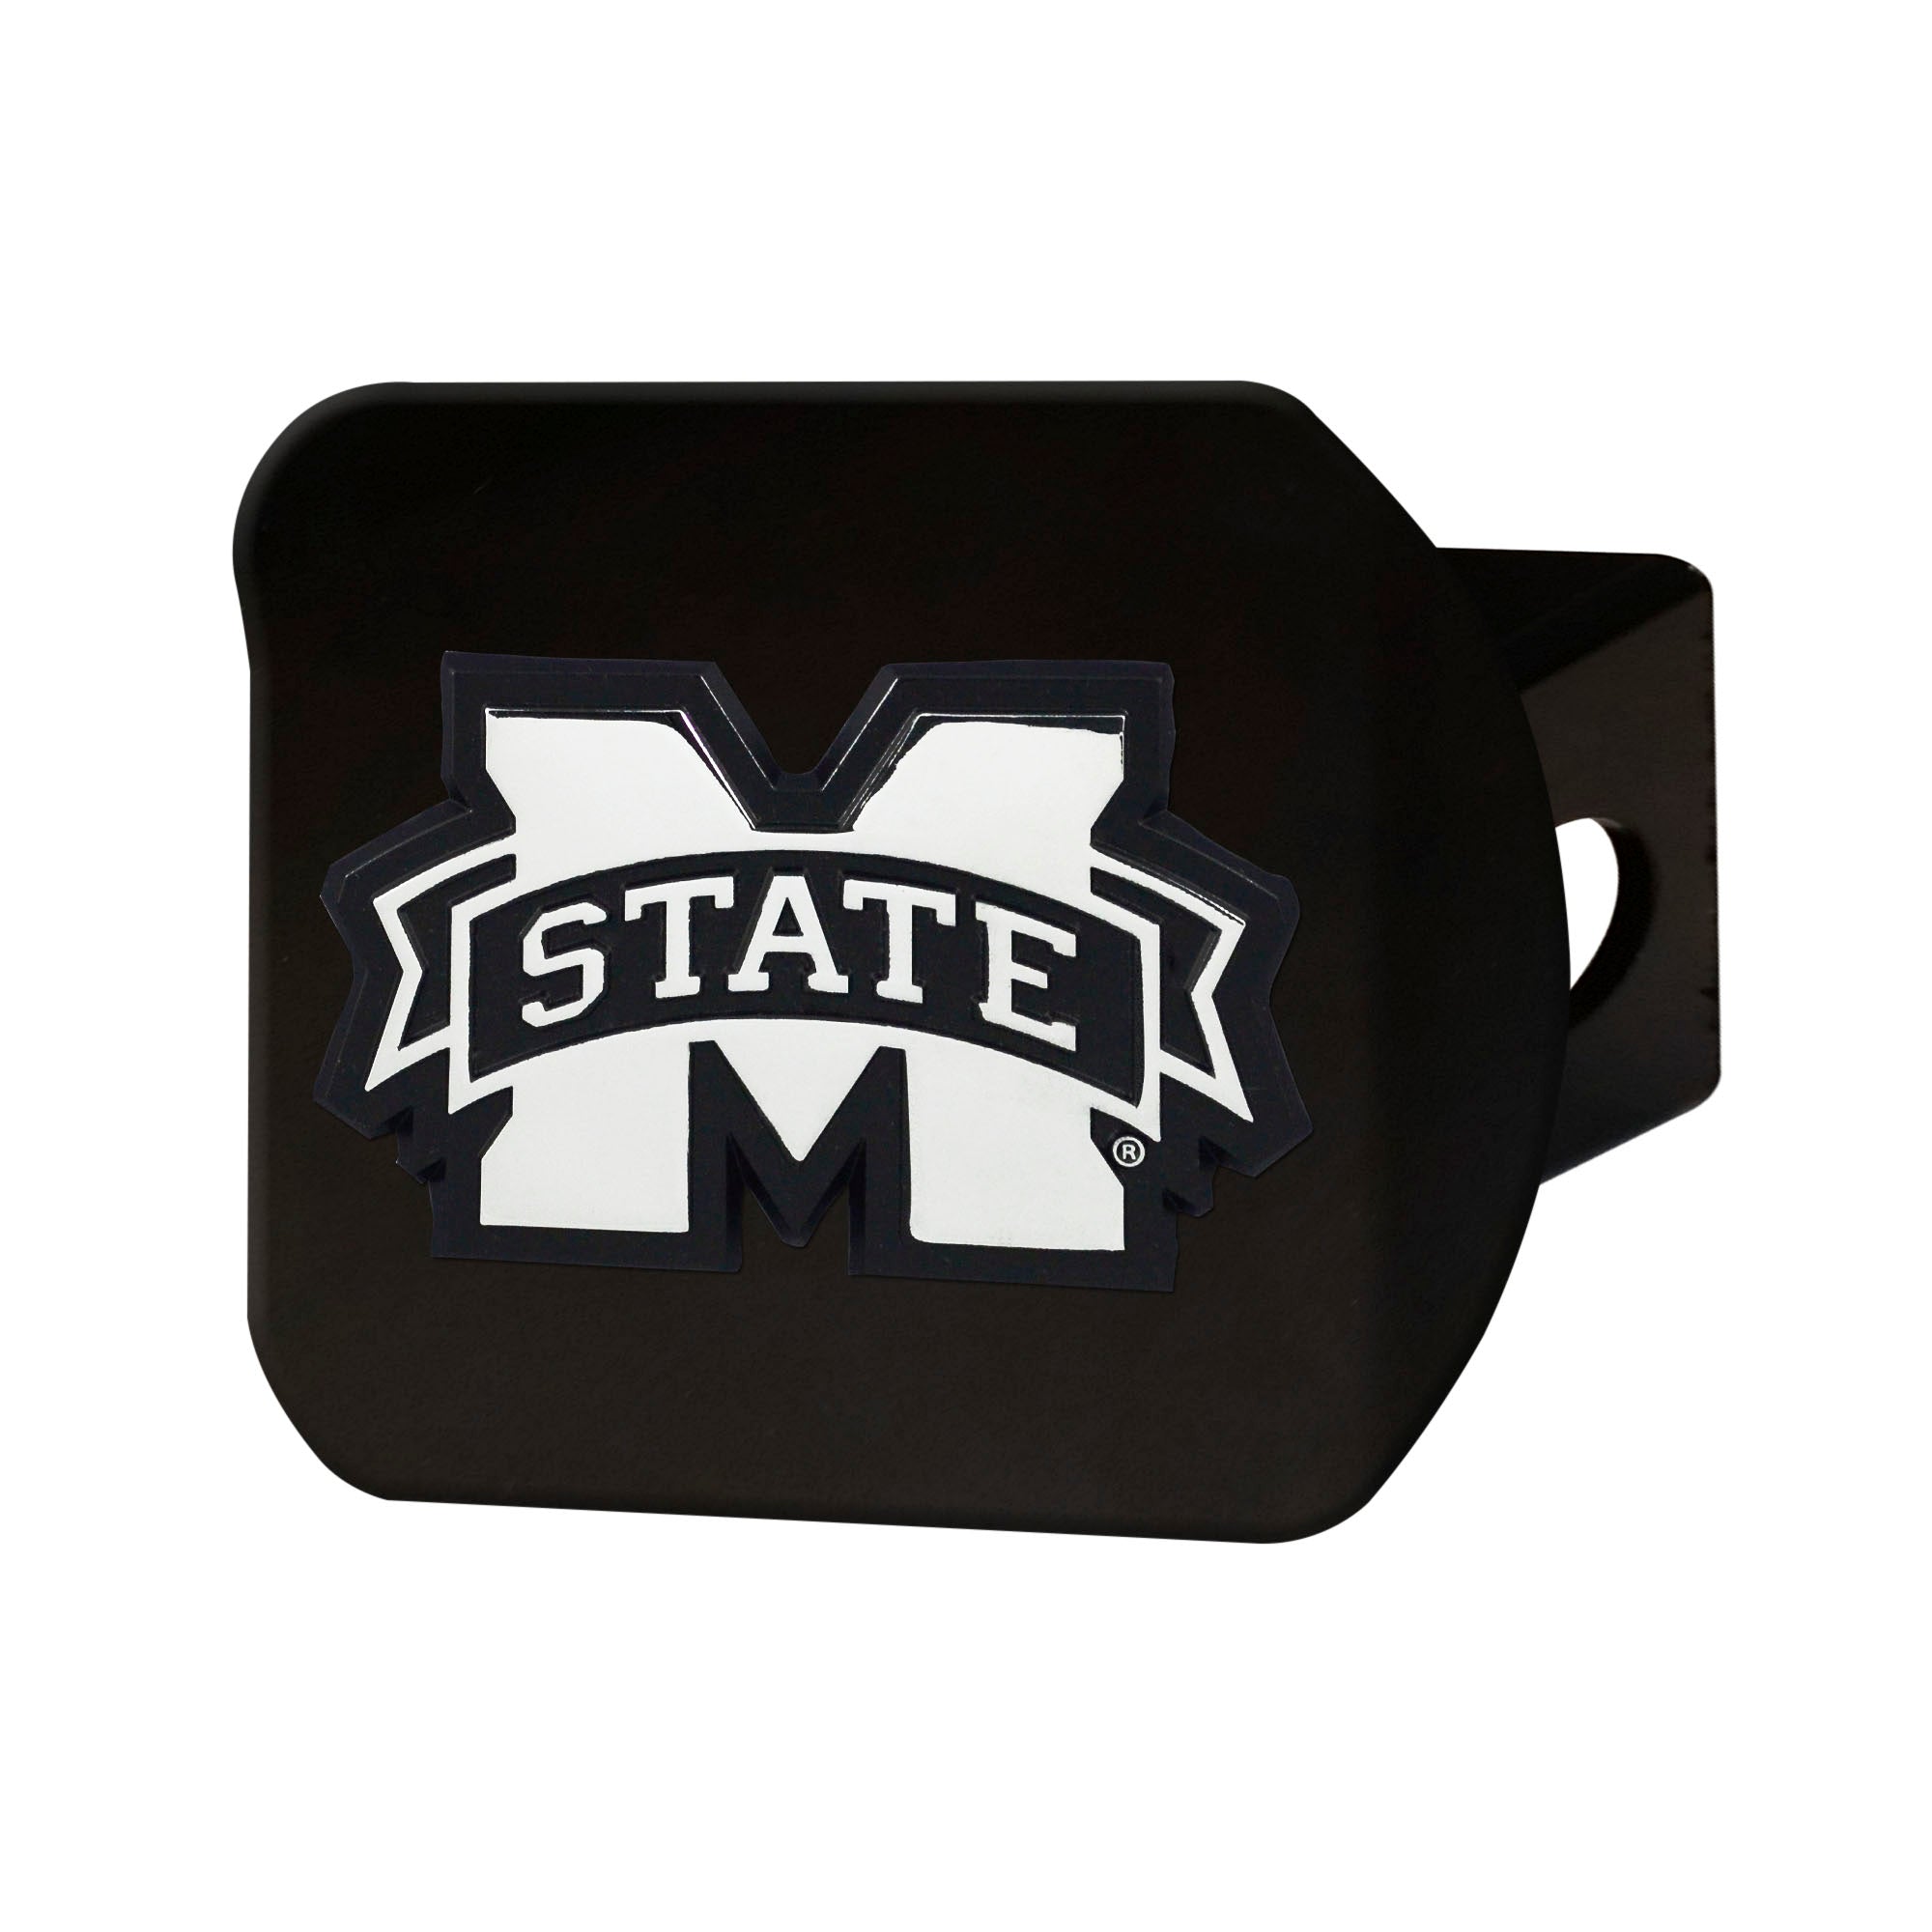 FANMATS, Mississippi State University Black Metal Hitch Cover